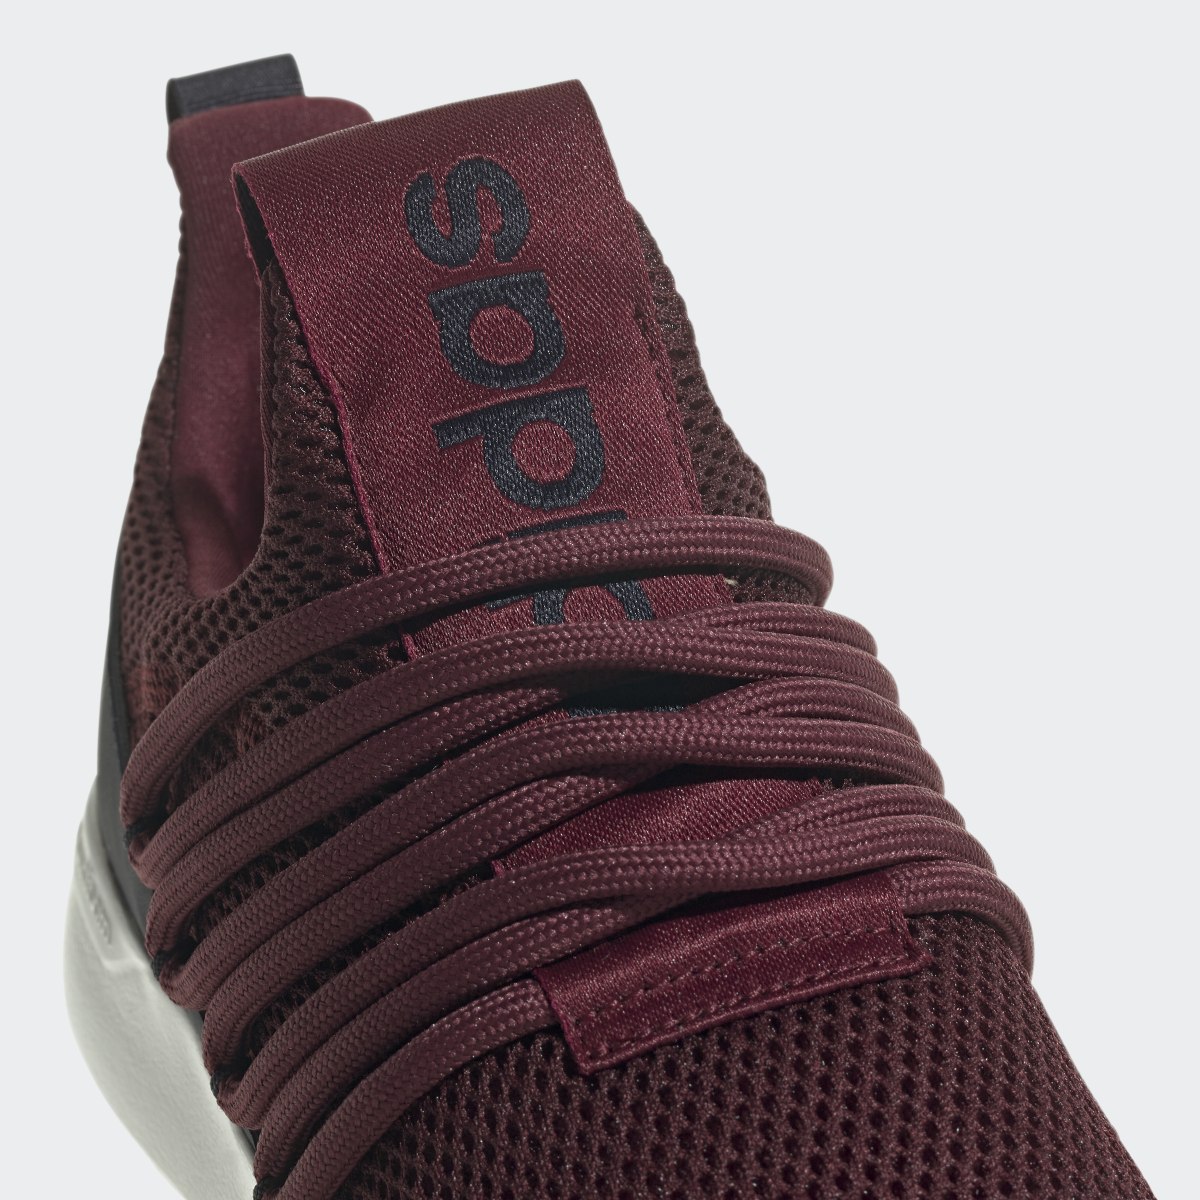 Adidas Lite Racer Adapt 3.0 Shoes. 8